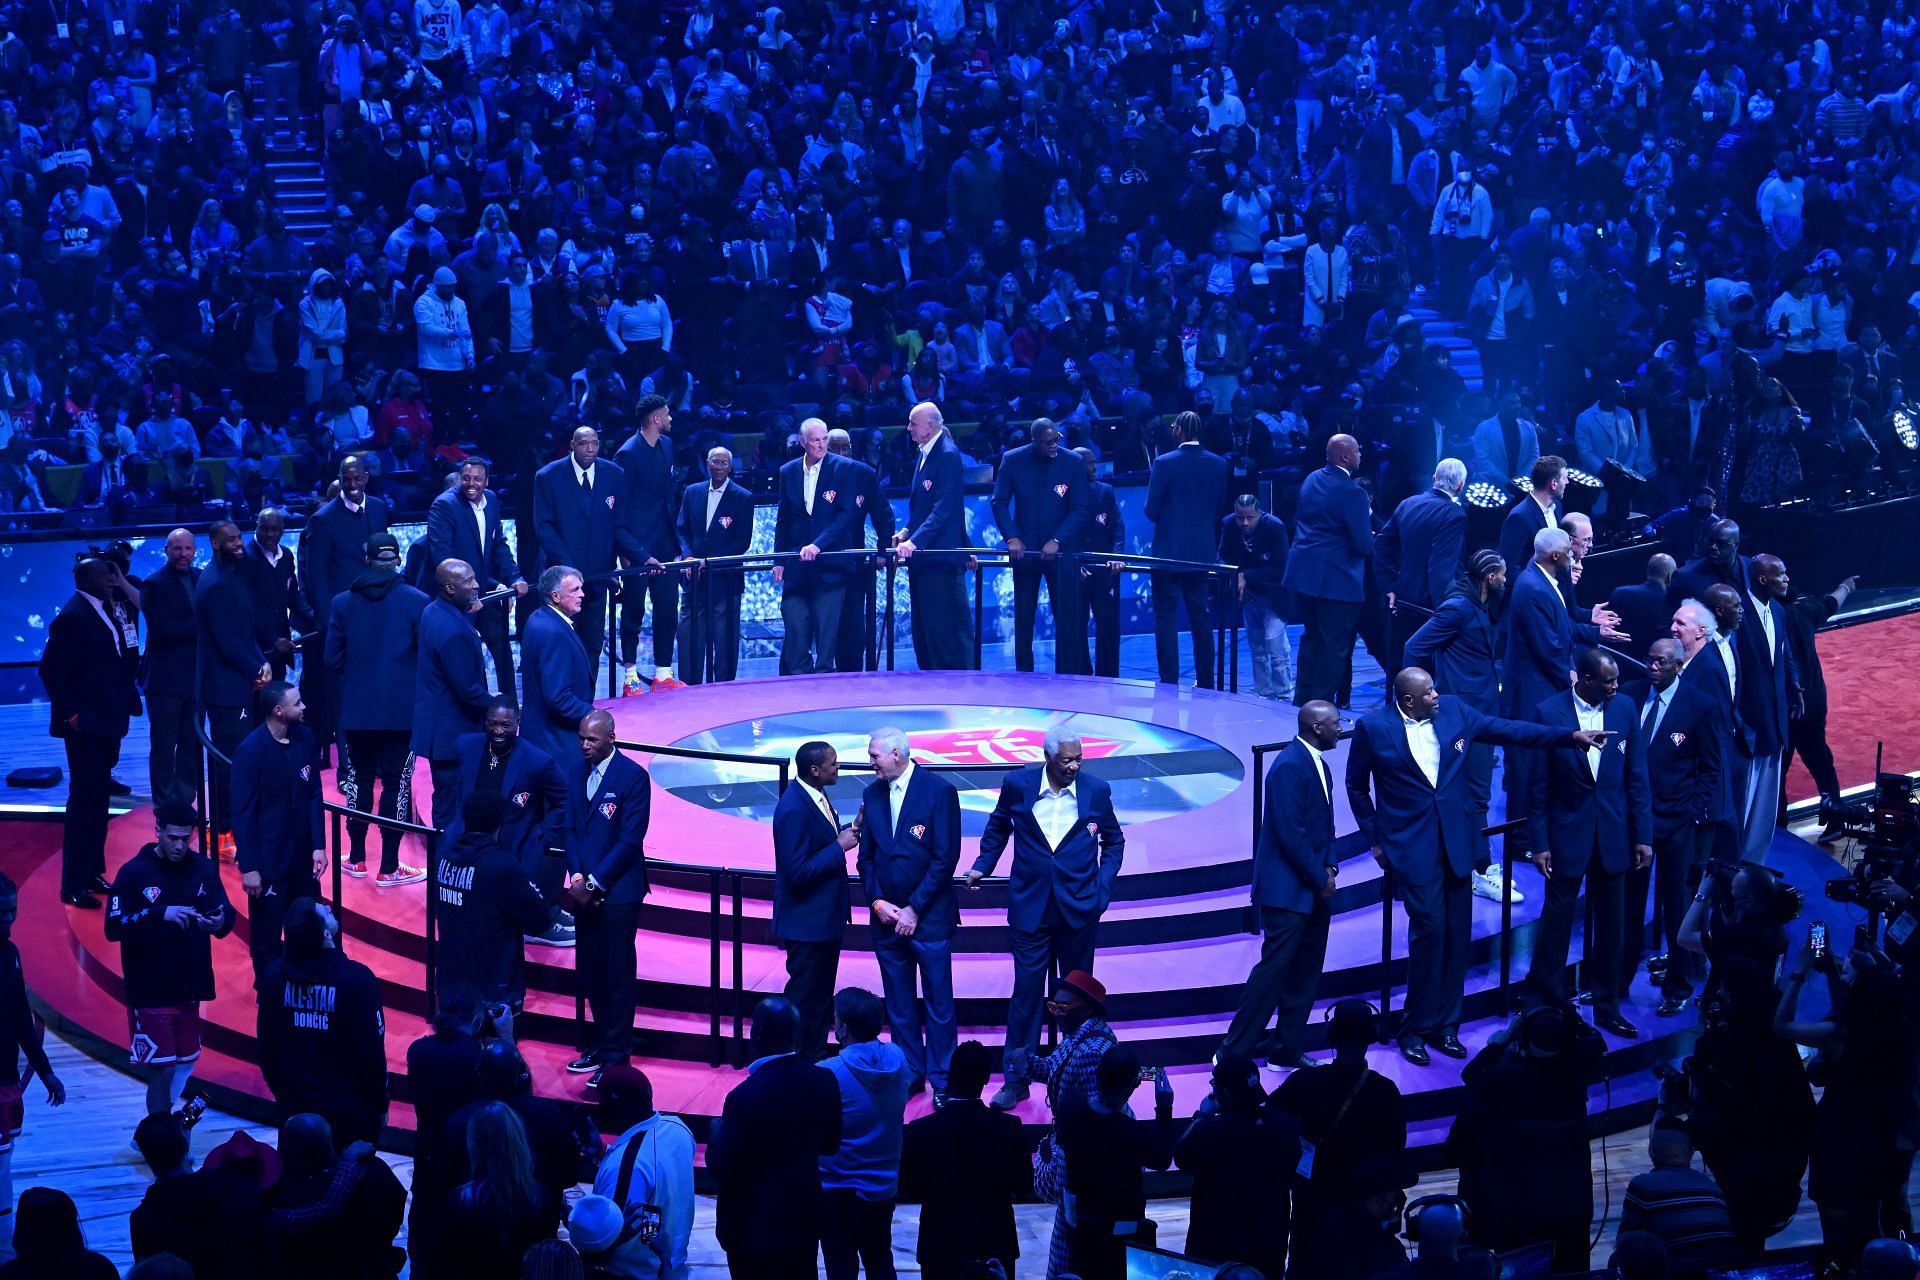 The 75th Anniversary Team honored at the 2022 NBA All-Star game in Cleveland.